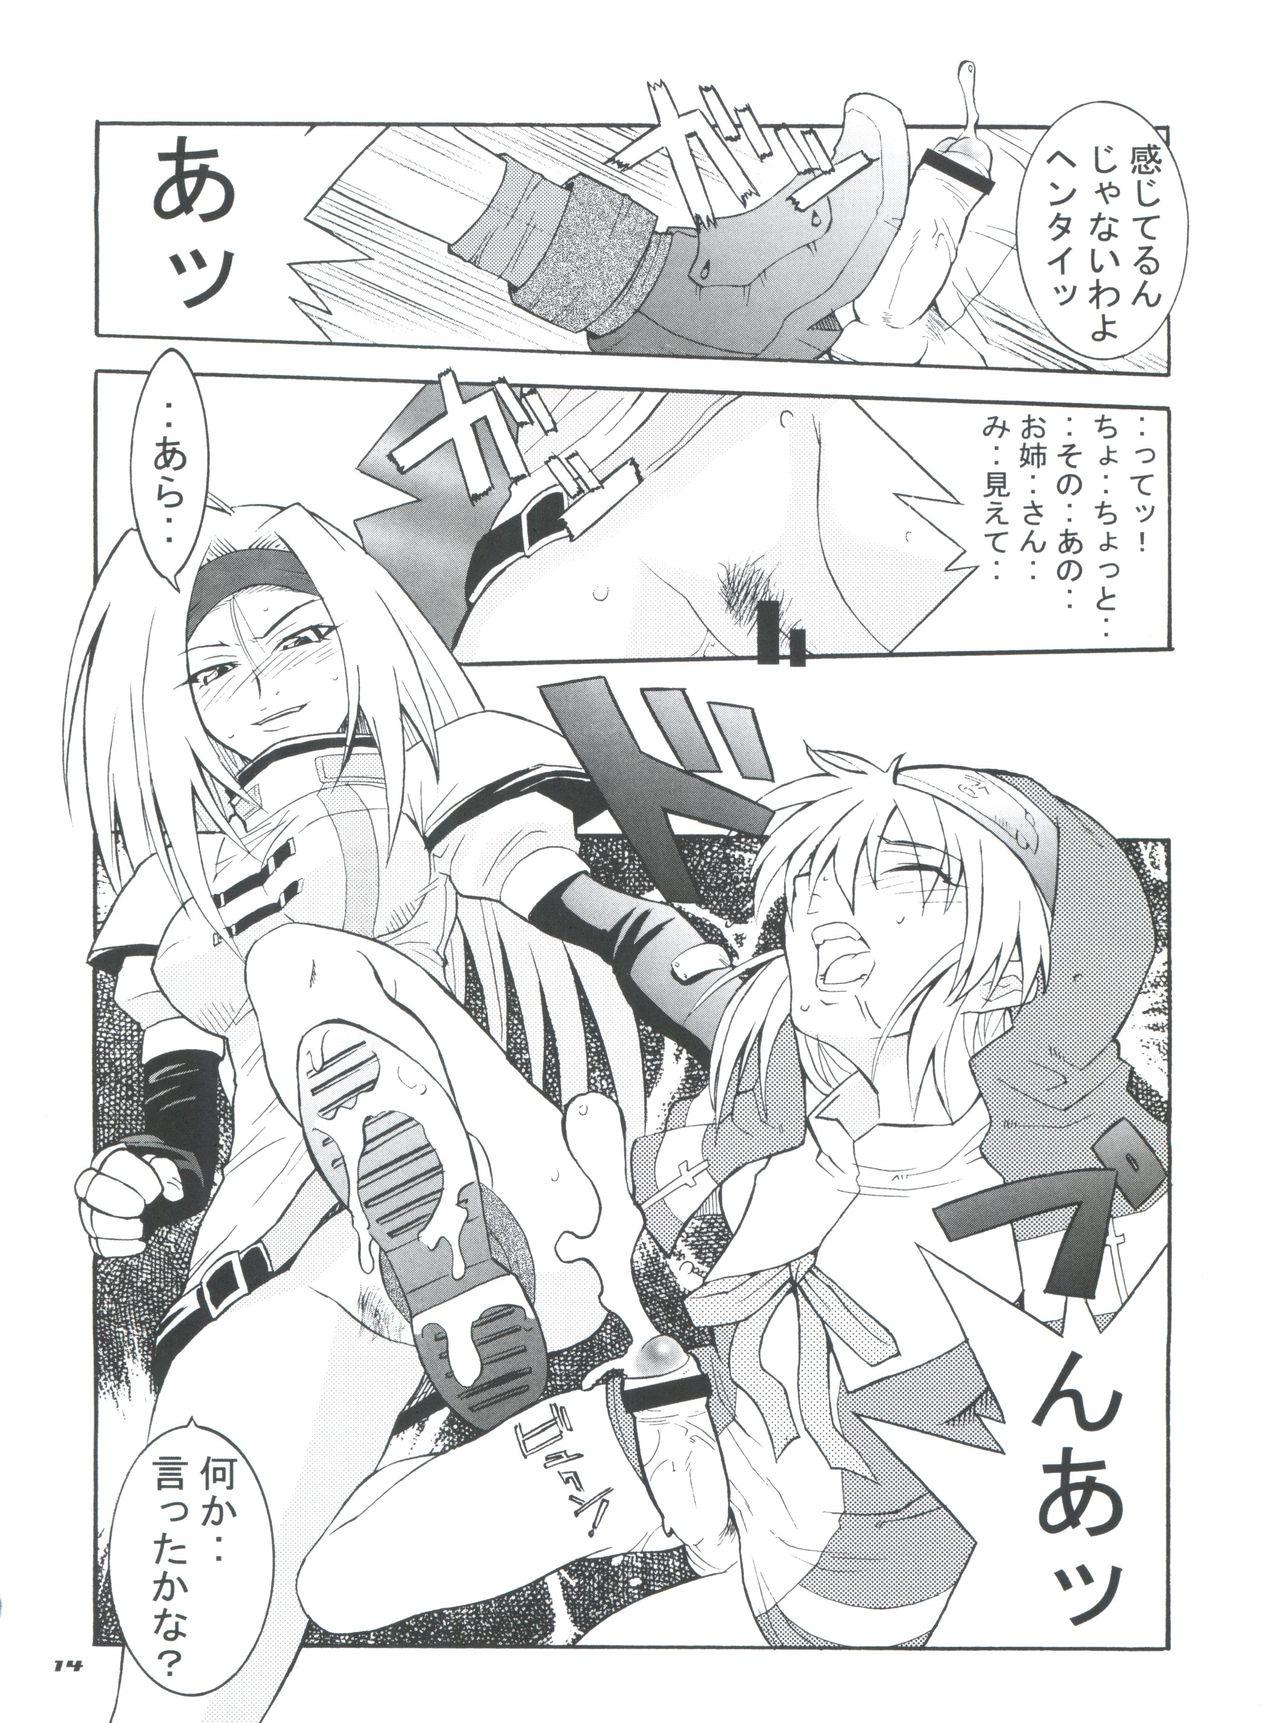 The Bridgex - Guilty gear Couple - Page 13